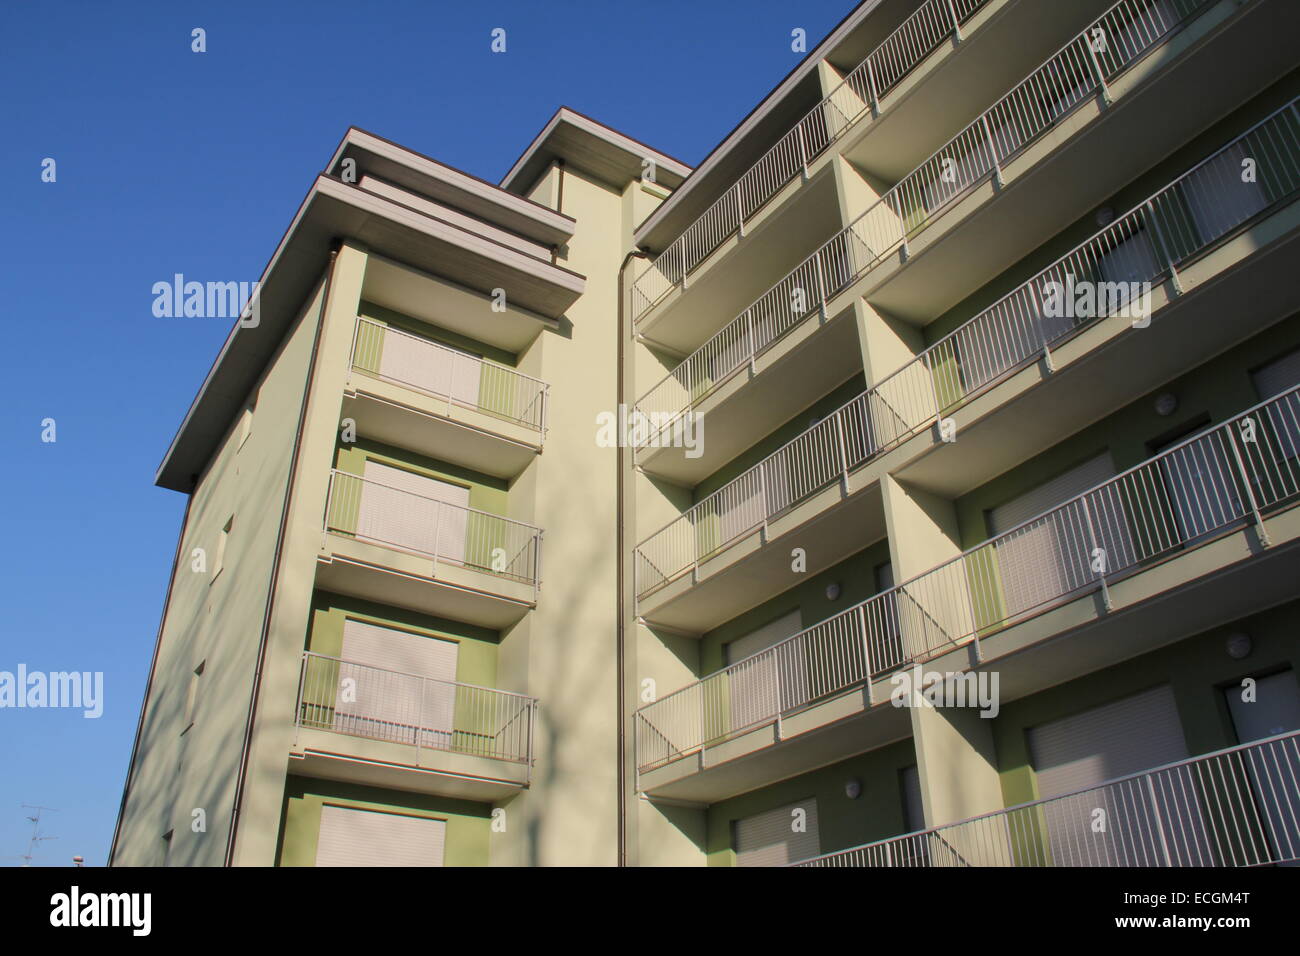 New housing construction in an urban environment. Stock Photo